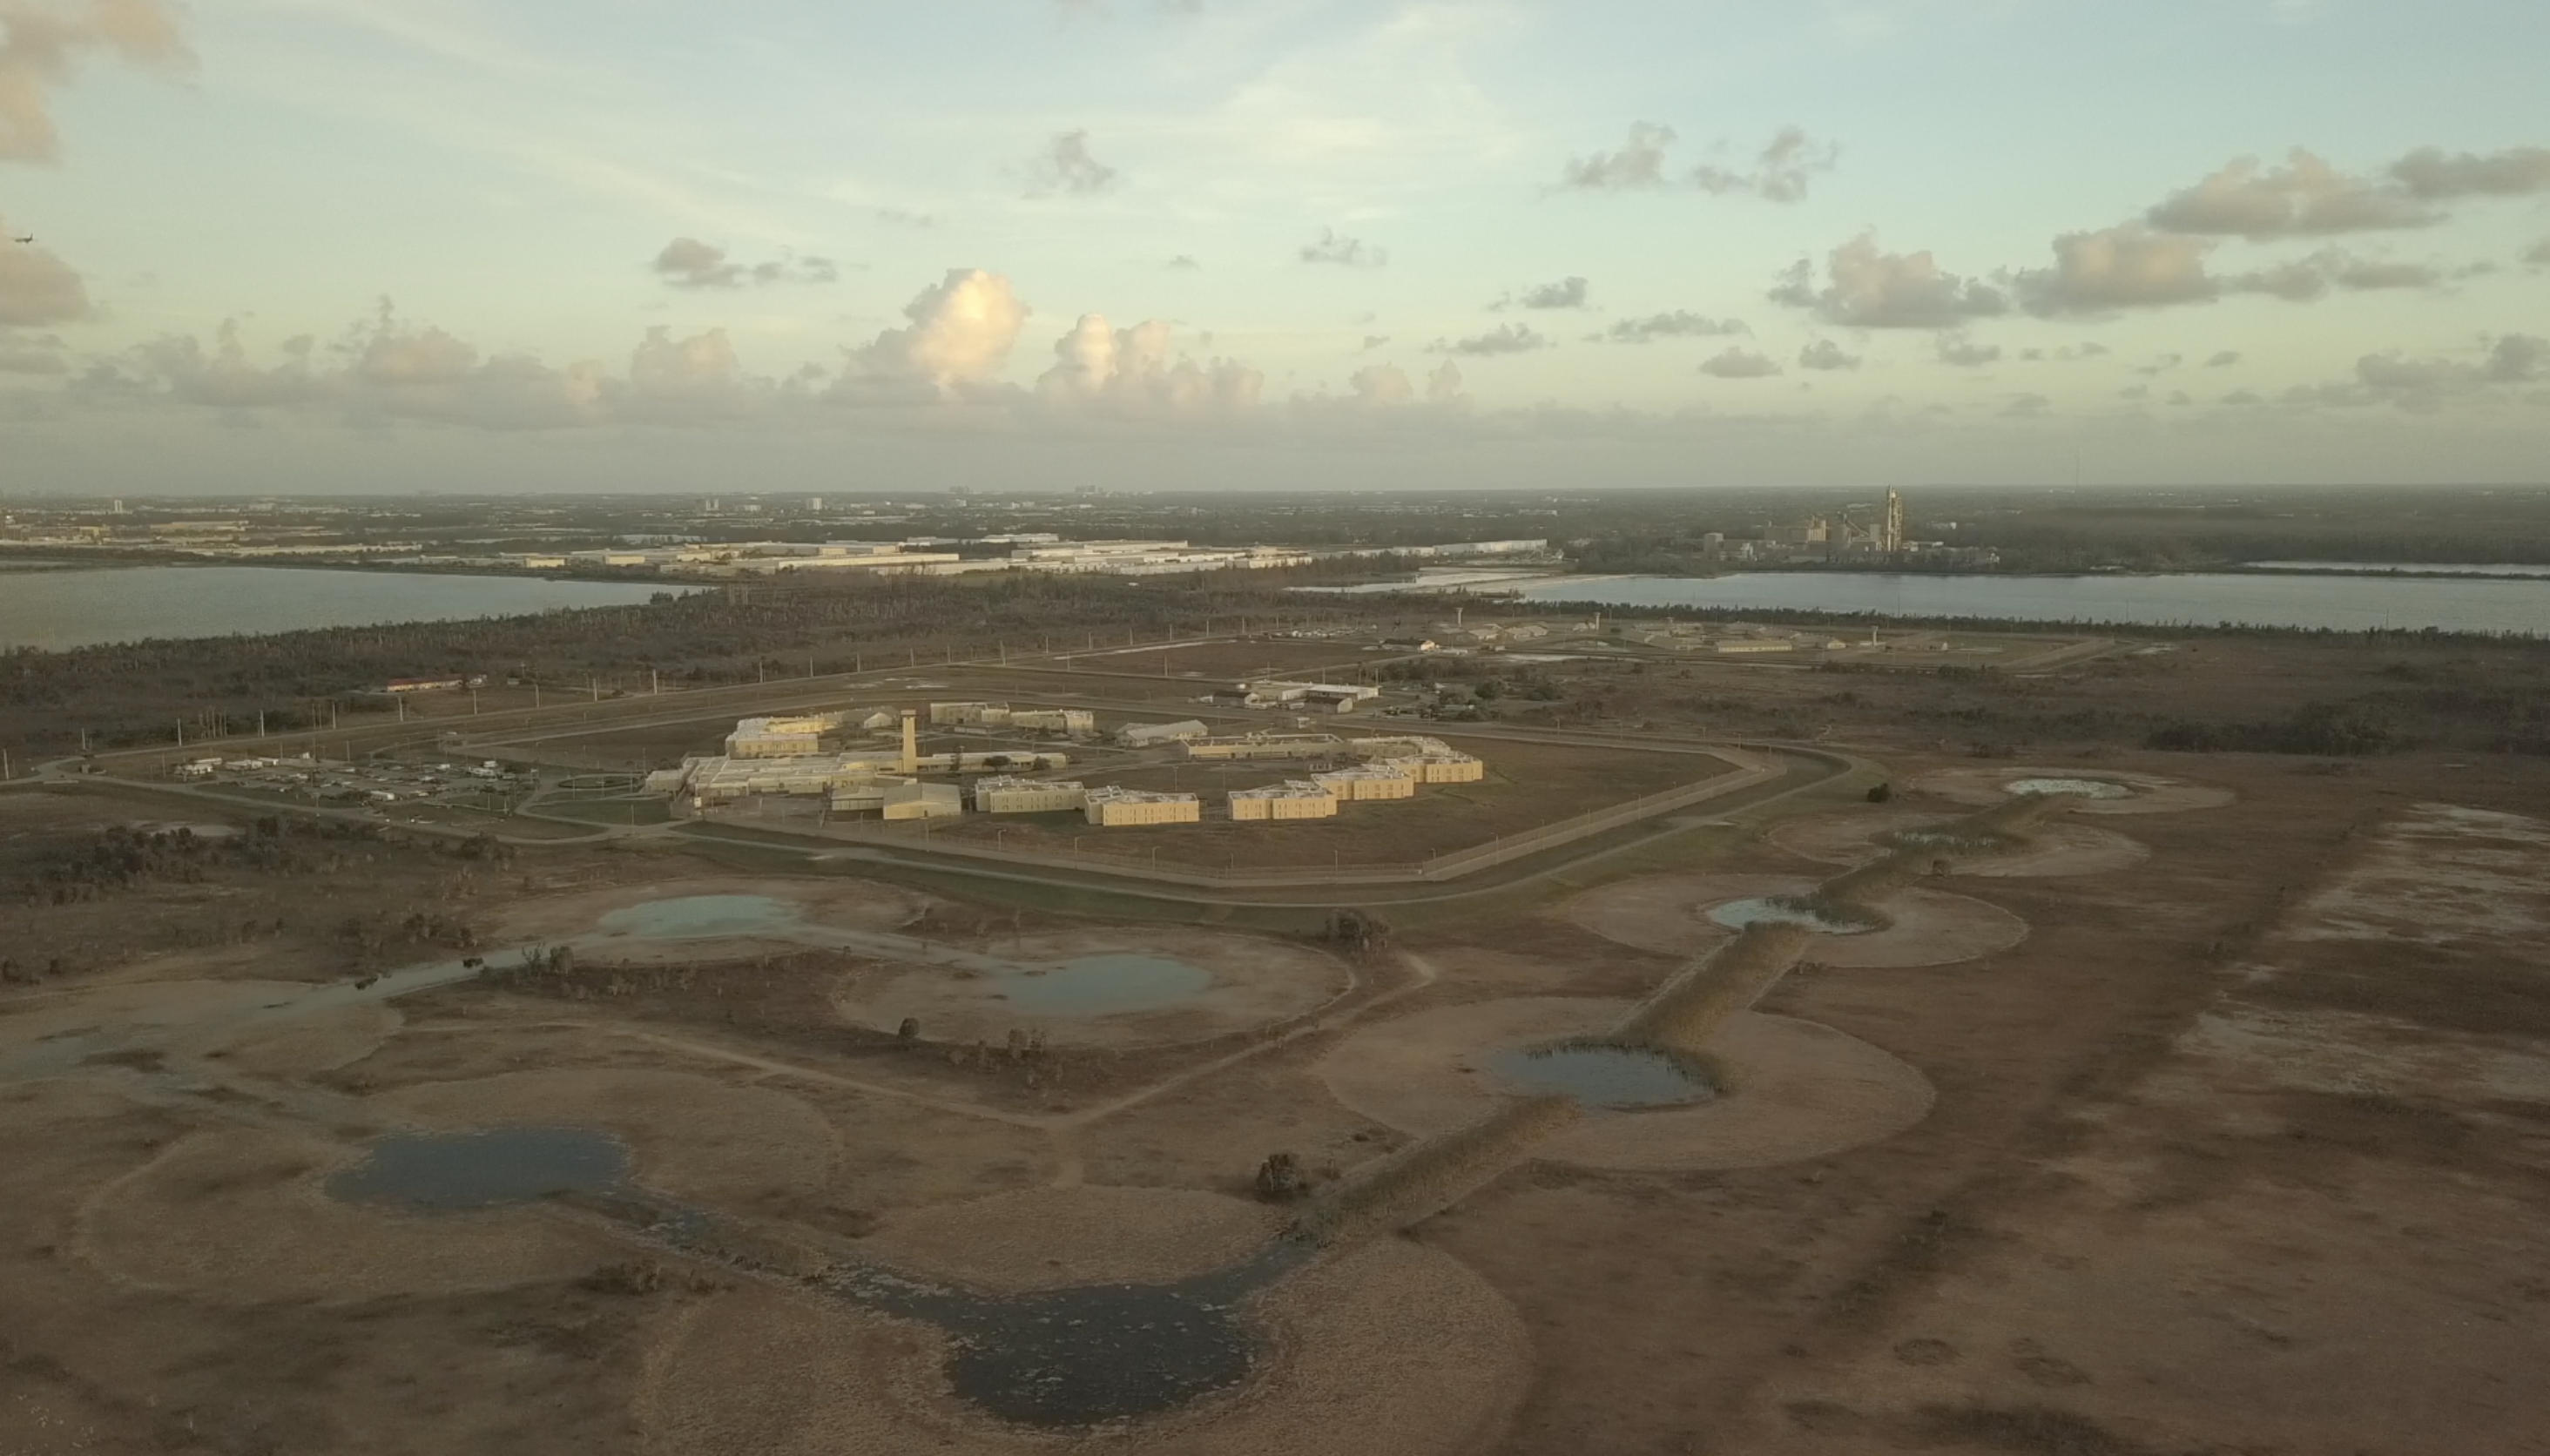 aerial view of a prison surrounded by an engineered wetland, with limestone quarries in the background